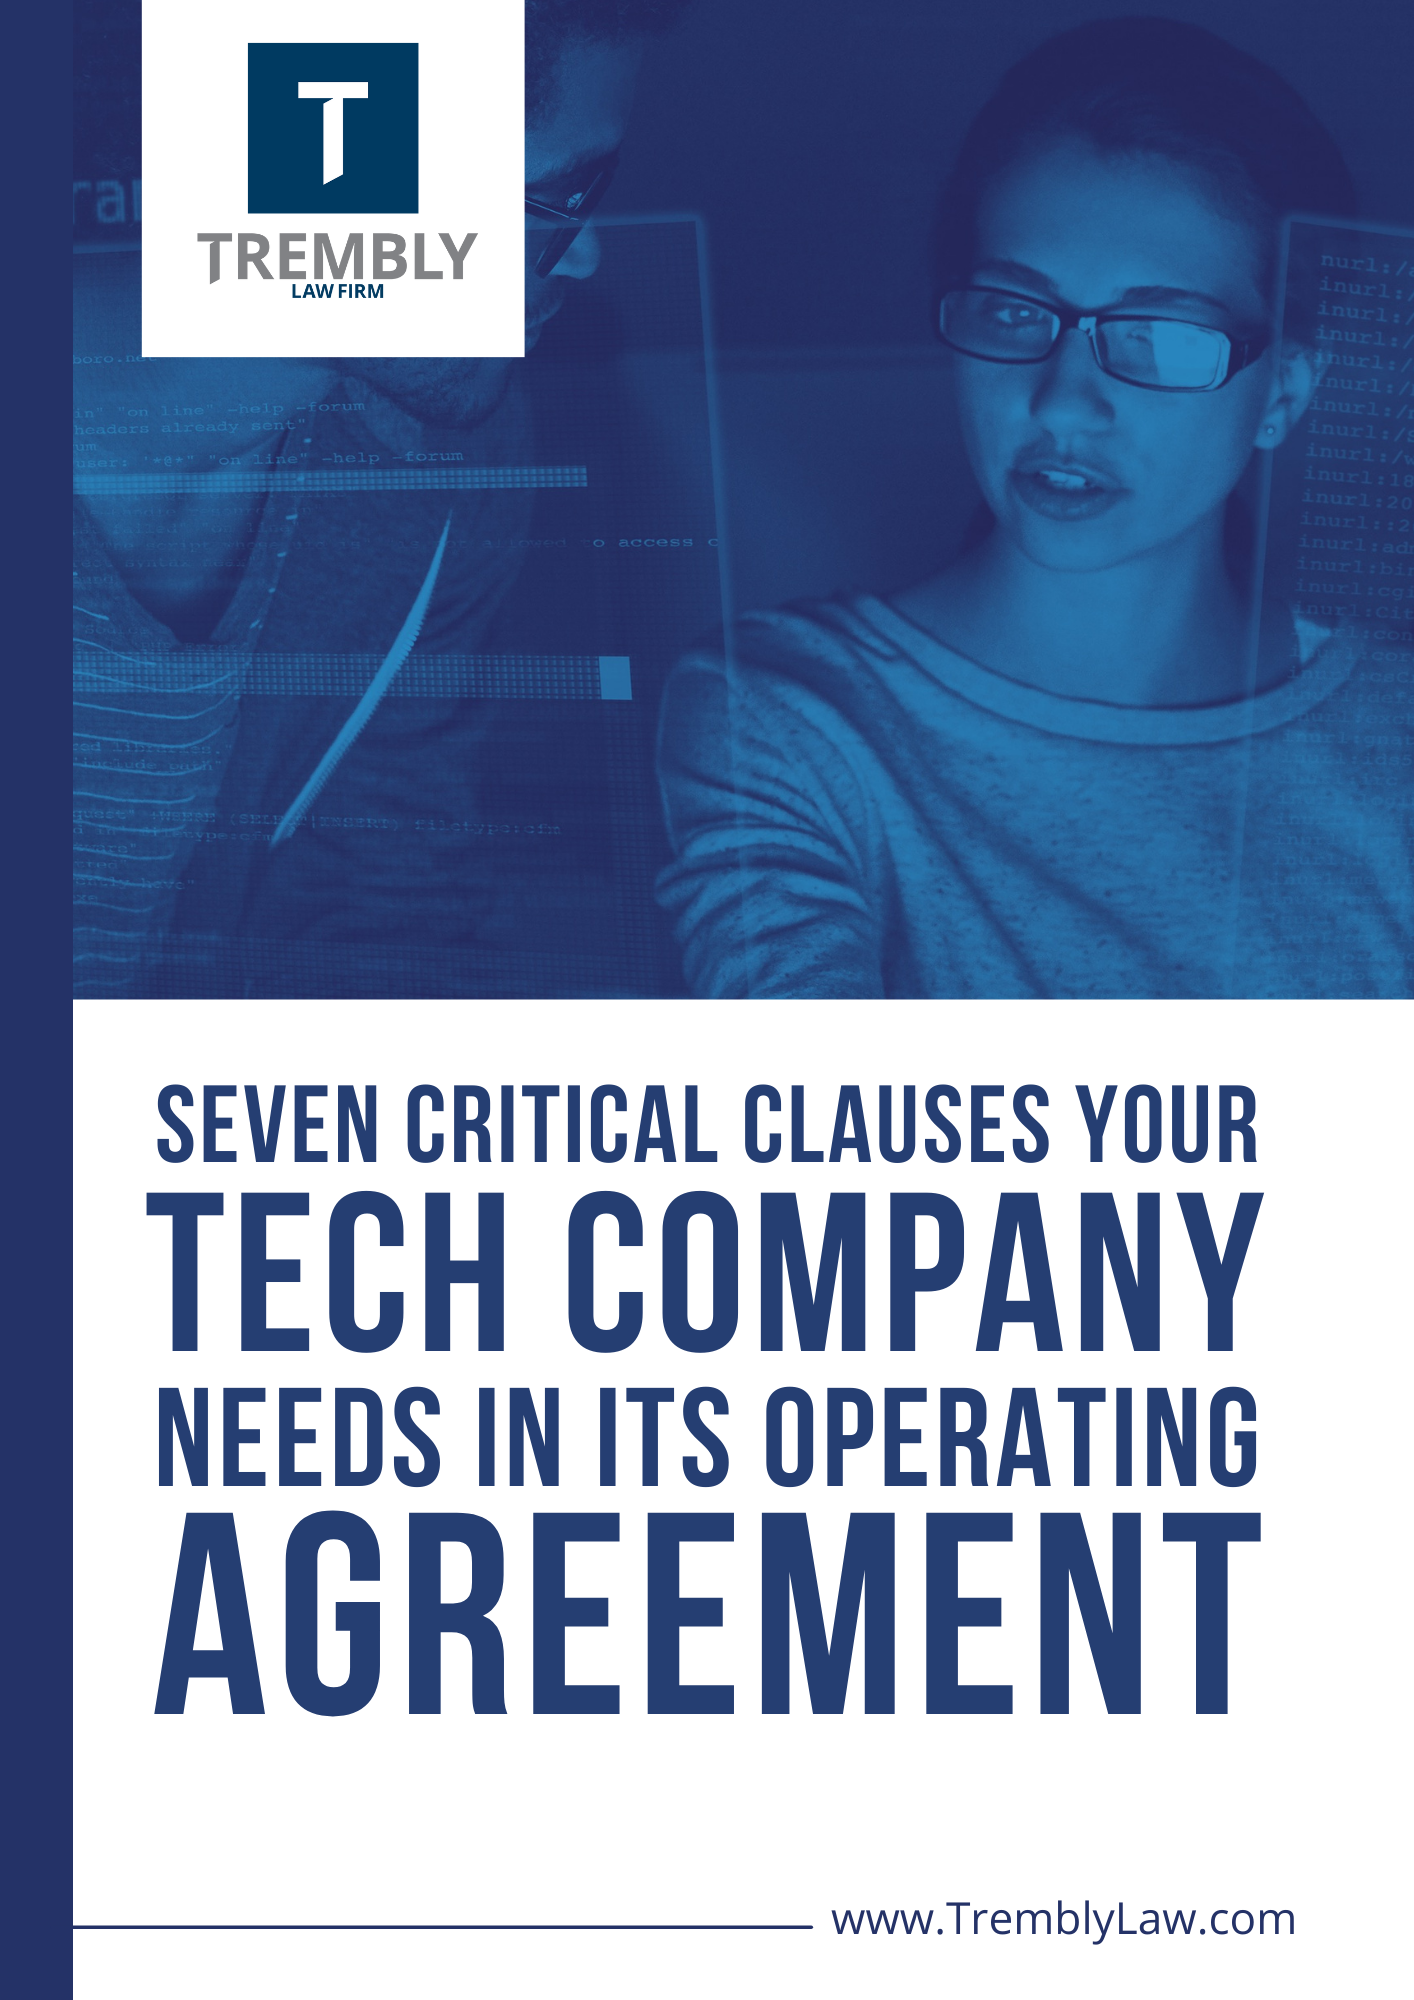 7 Critical Clauses Your Tech Company Needs in its Operating Agreement